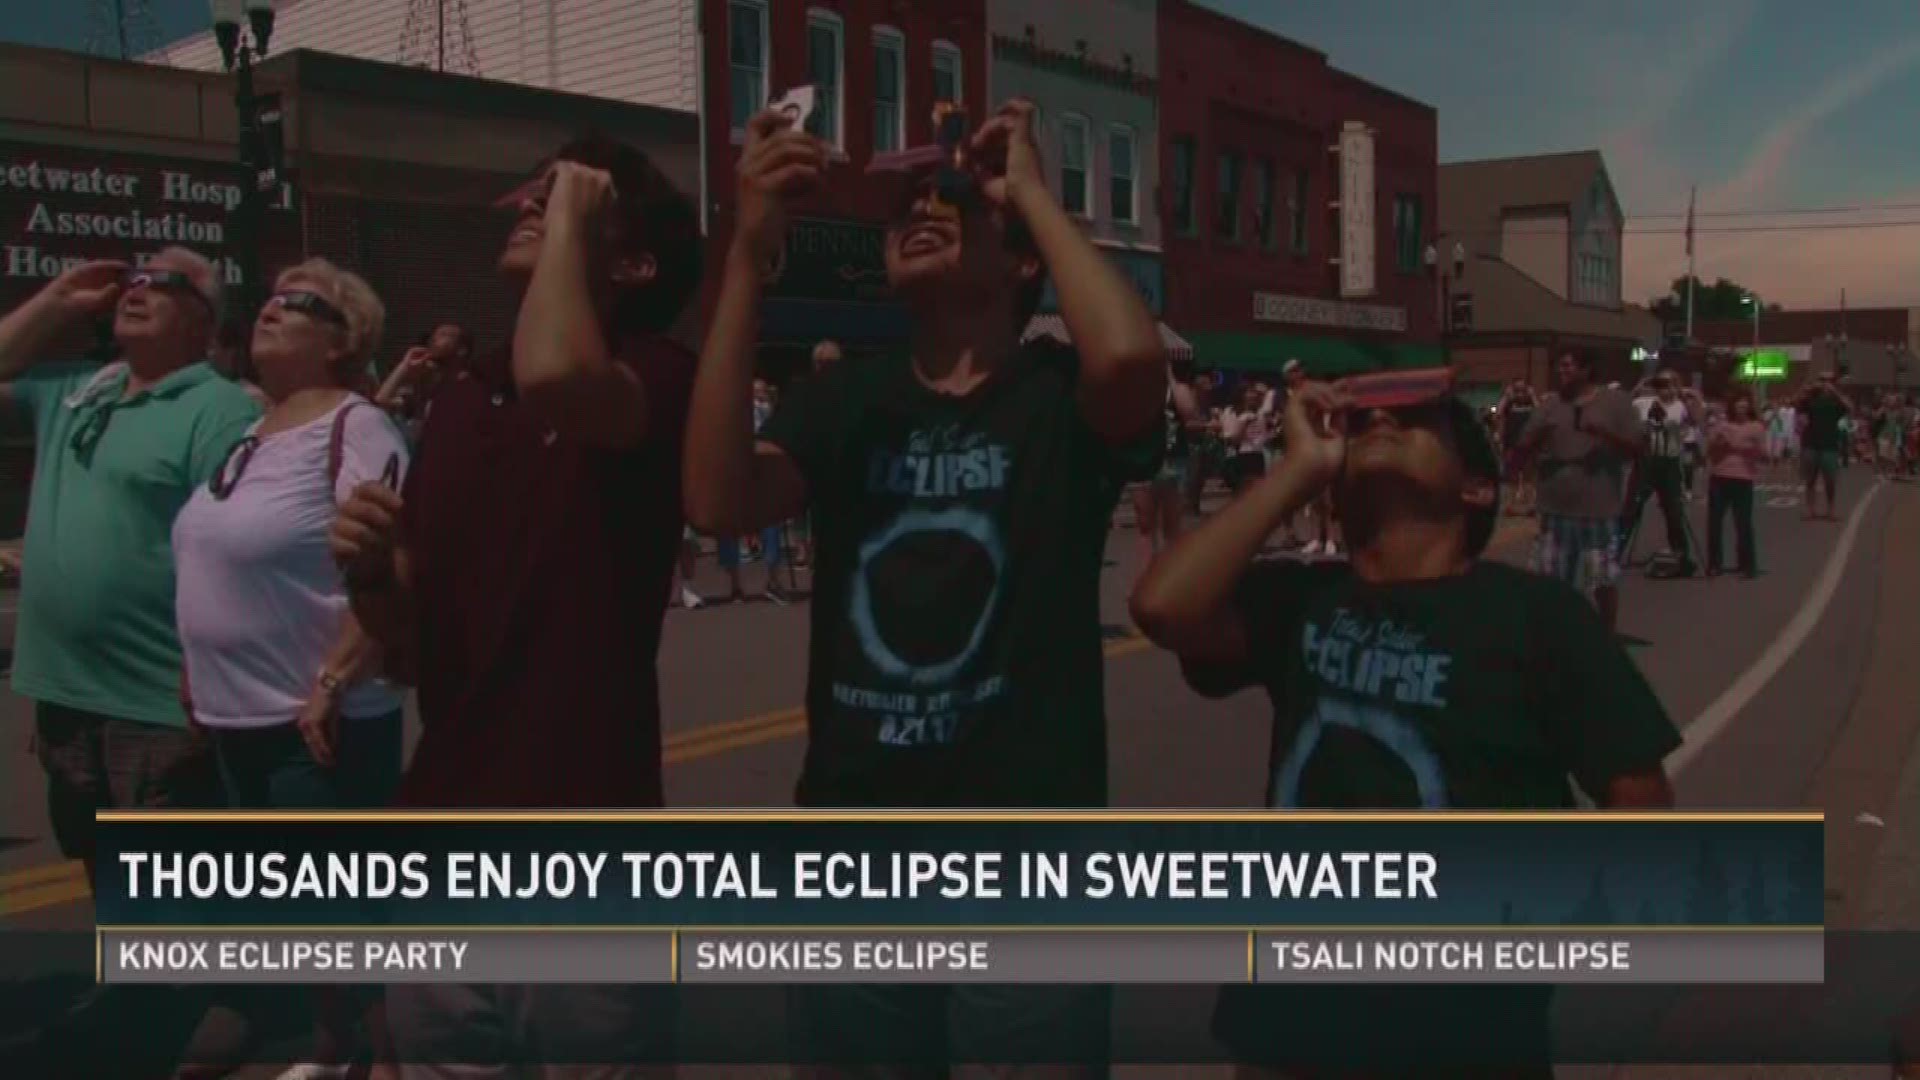 Aug. 21, 2017: Relive the total solar eclipse with a group of friends who traveled to Sweetwater, Tennessee, from Washington D.C.